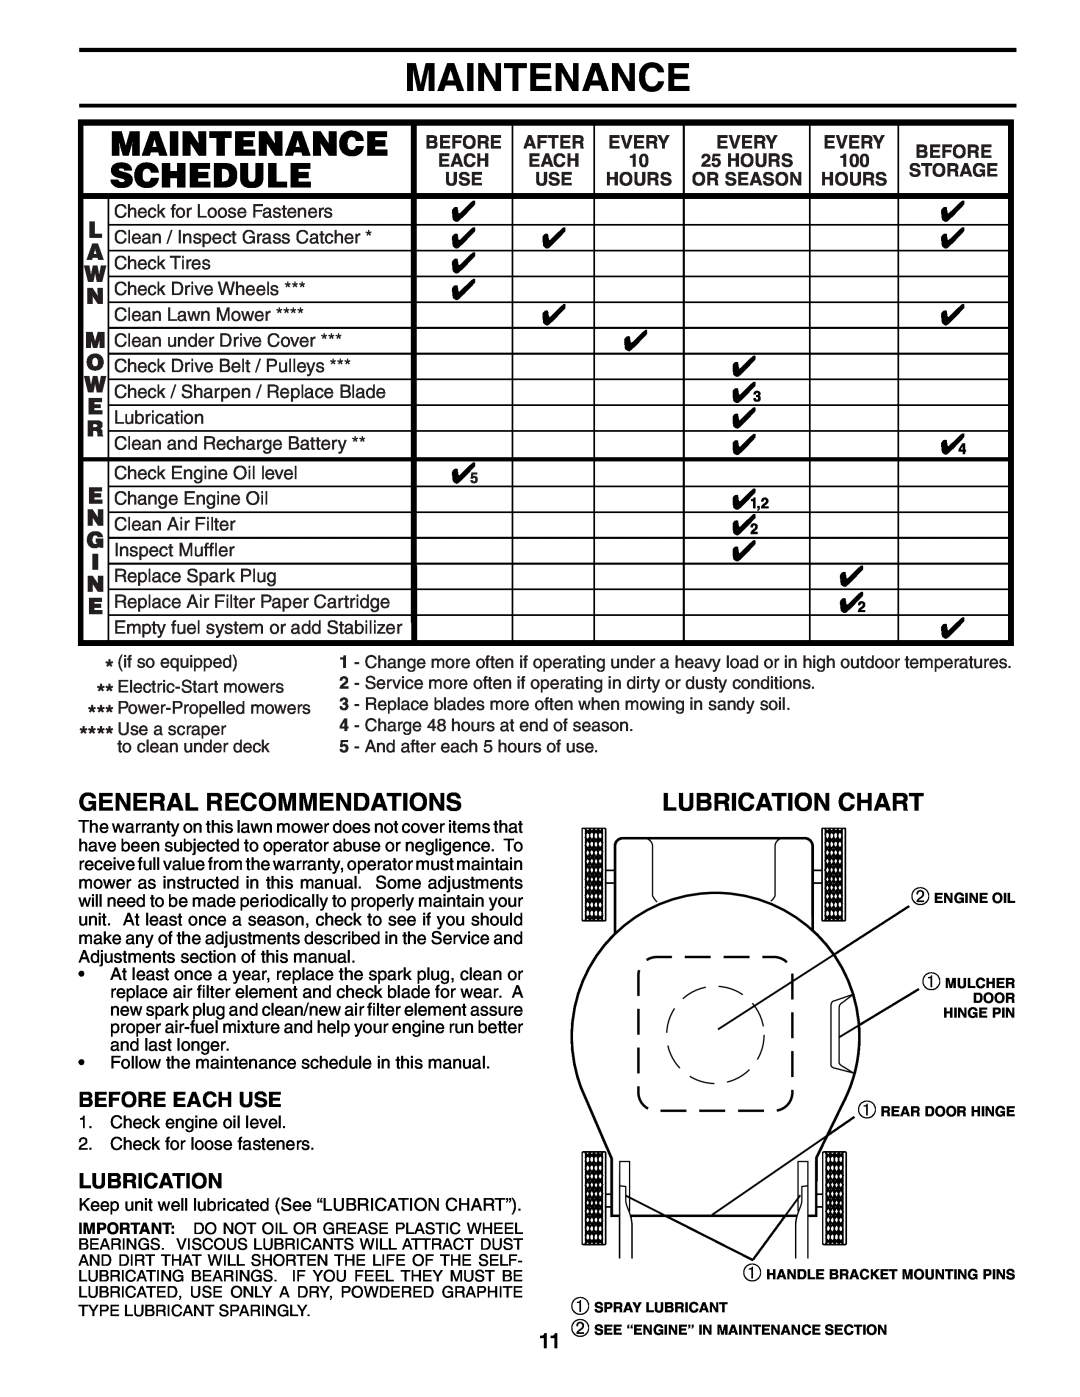 Husqvarna 87521RES Maintenance, General Recommendations, Lubrication Chart, Before Each Use, After, Every, Storage, Hours 